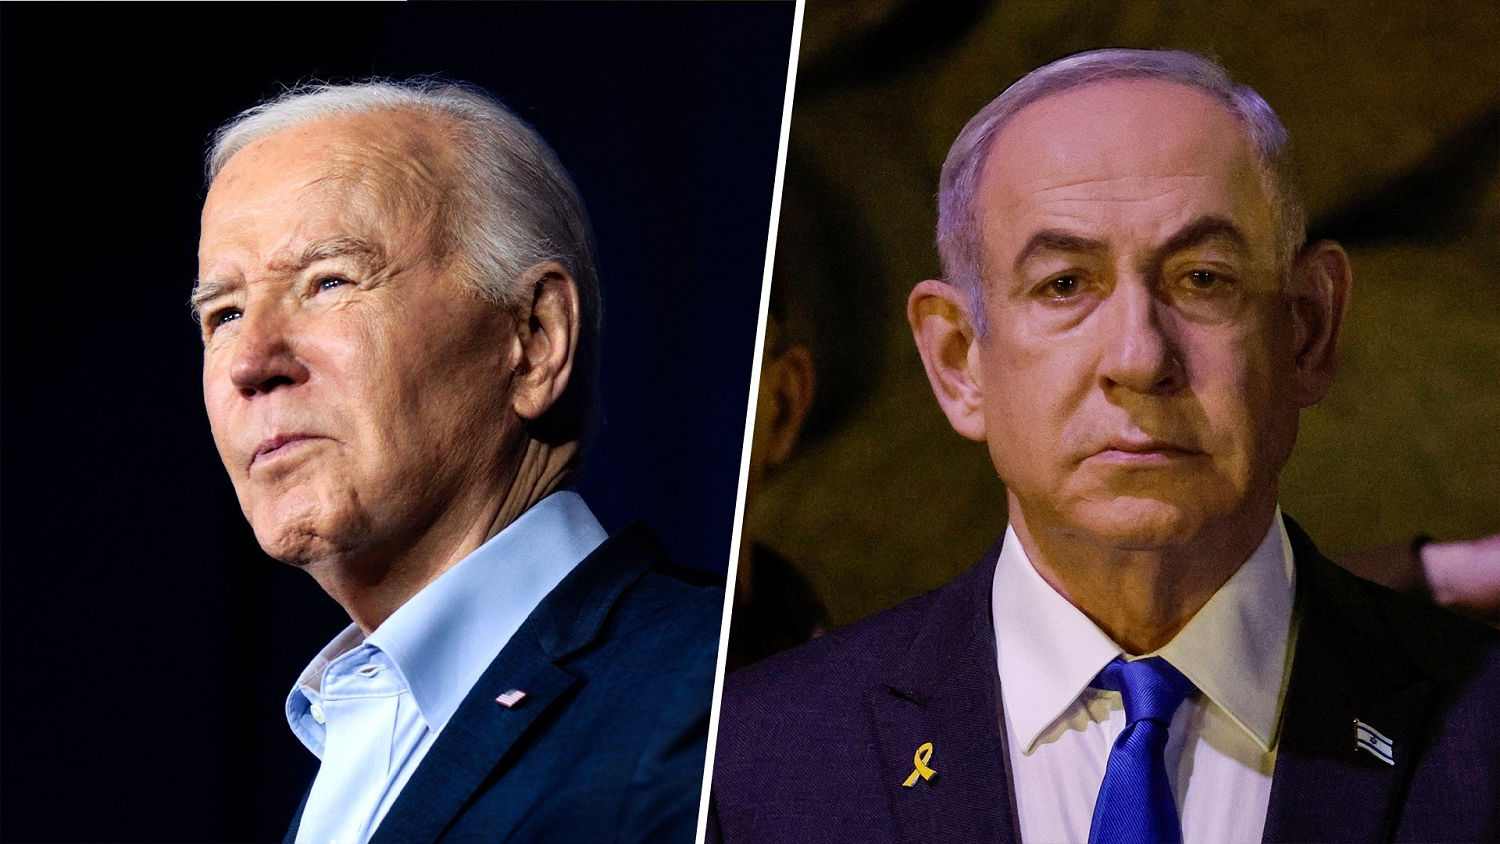 Where will Biden draw the line on Israel’s attack in Gaza?